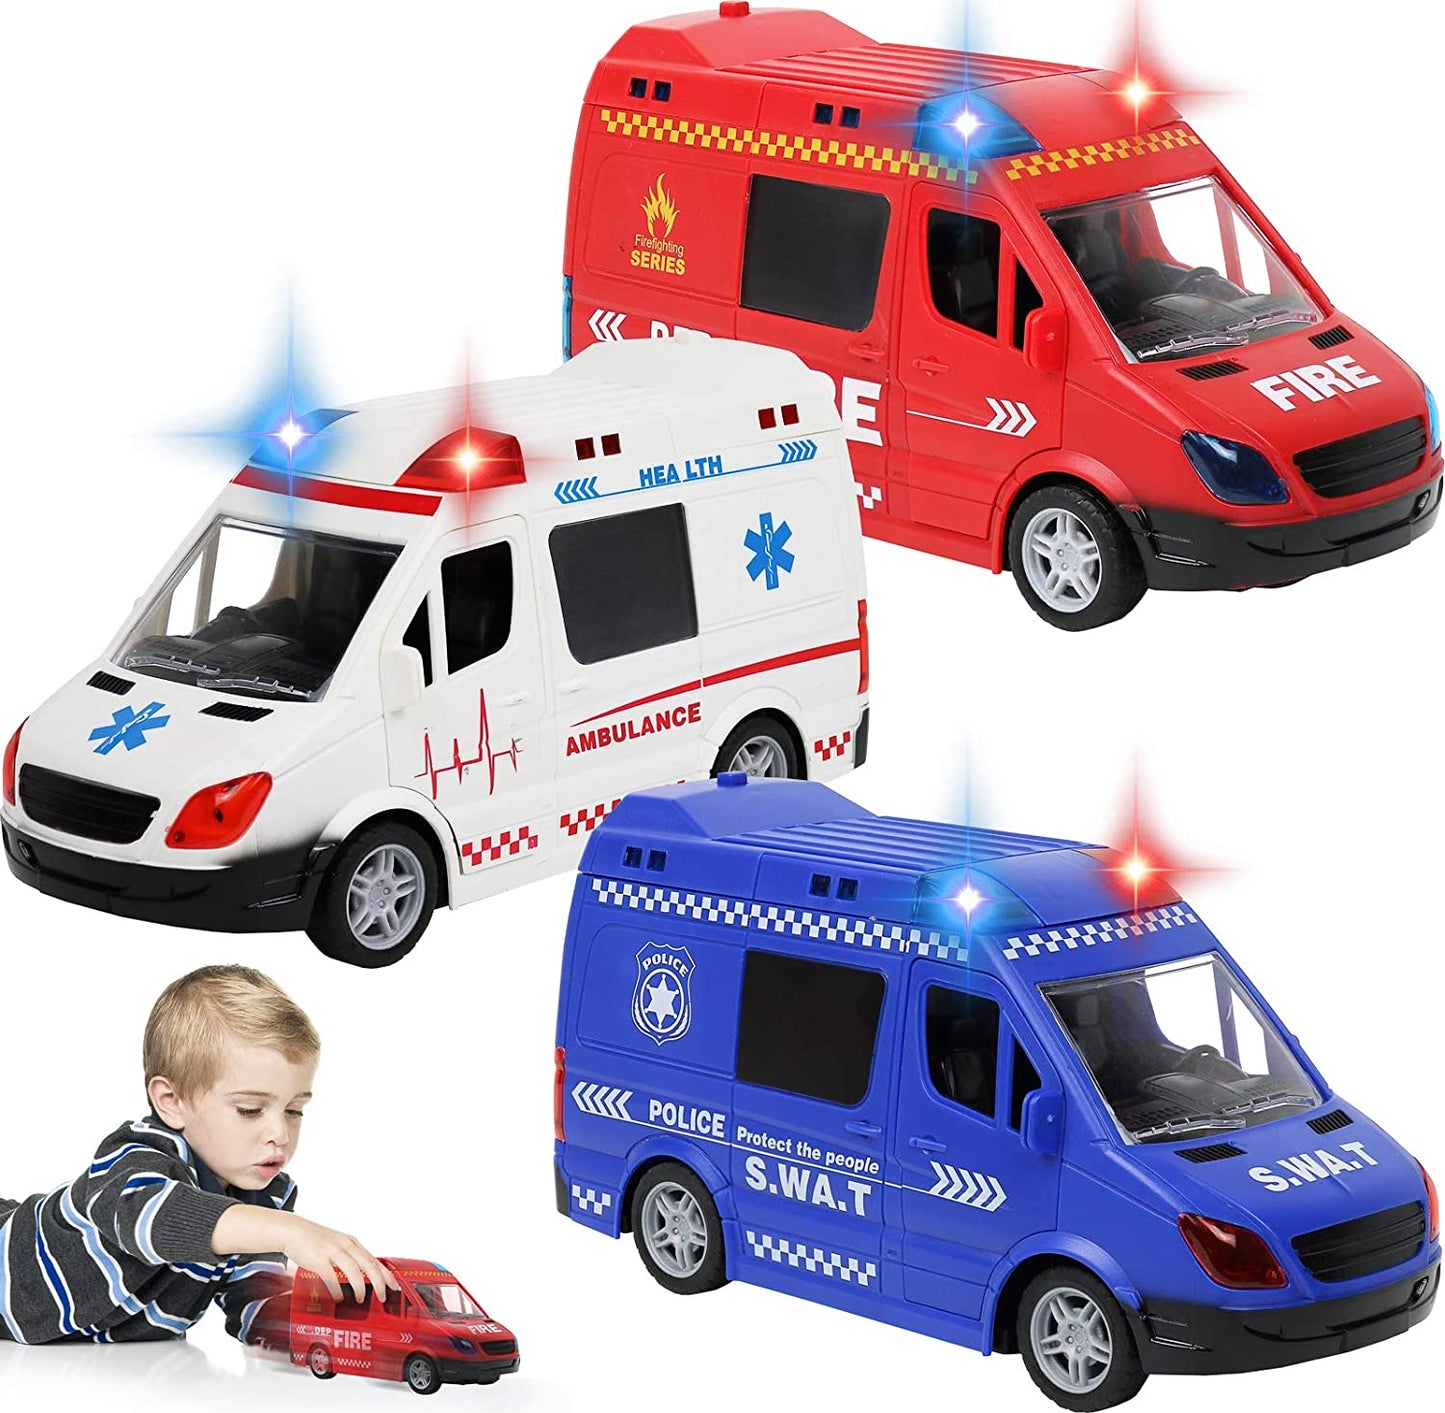 Emergency Vehicles Toy Set [3 Pack] | Ambulance, Fire Engine Truck, Police Car Toys for Boys | Friction Powered with Realistic Lights and Sounds